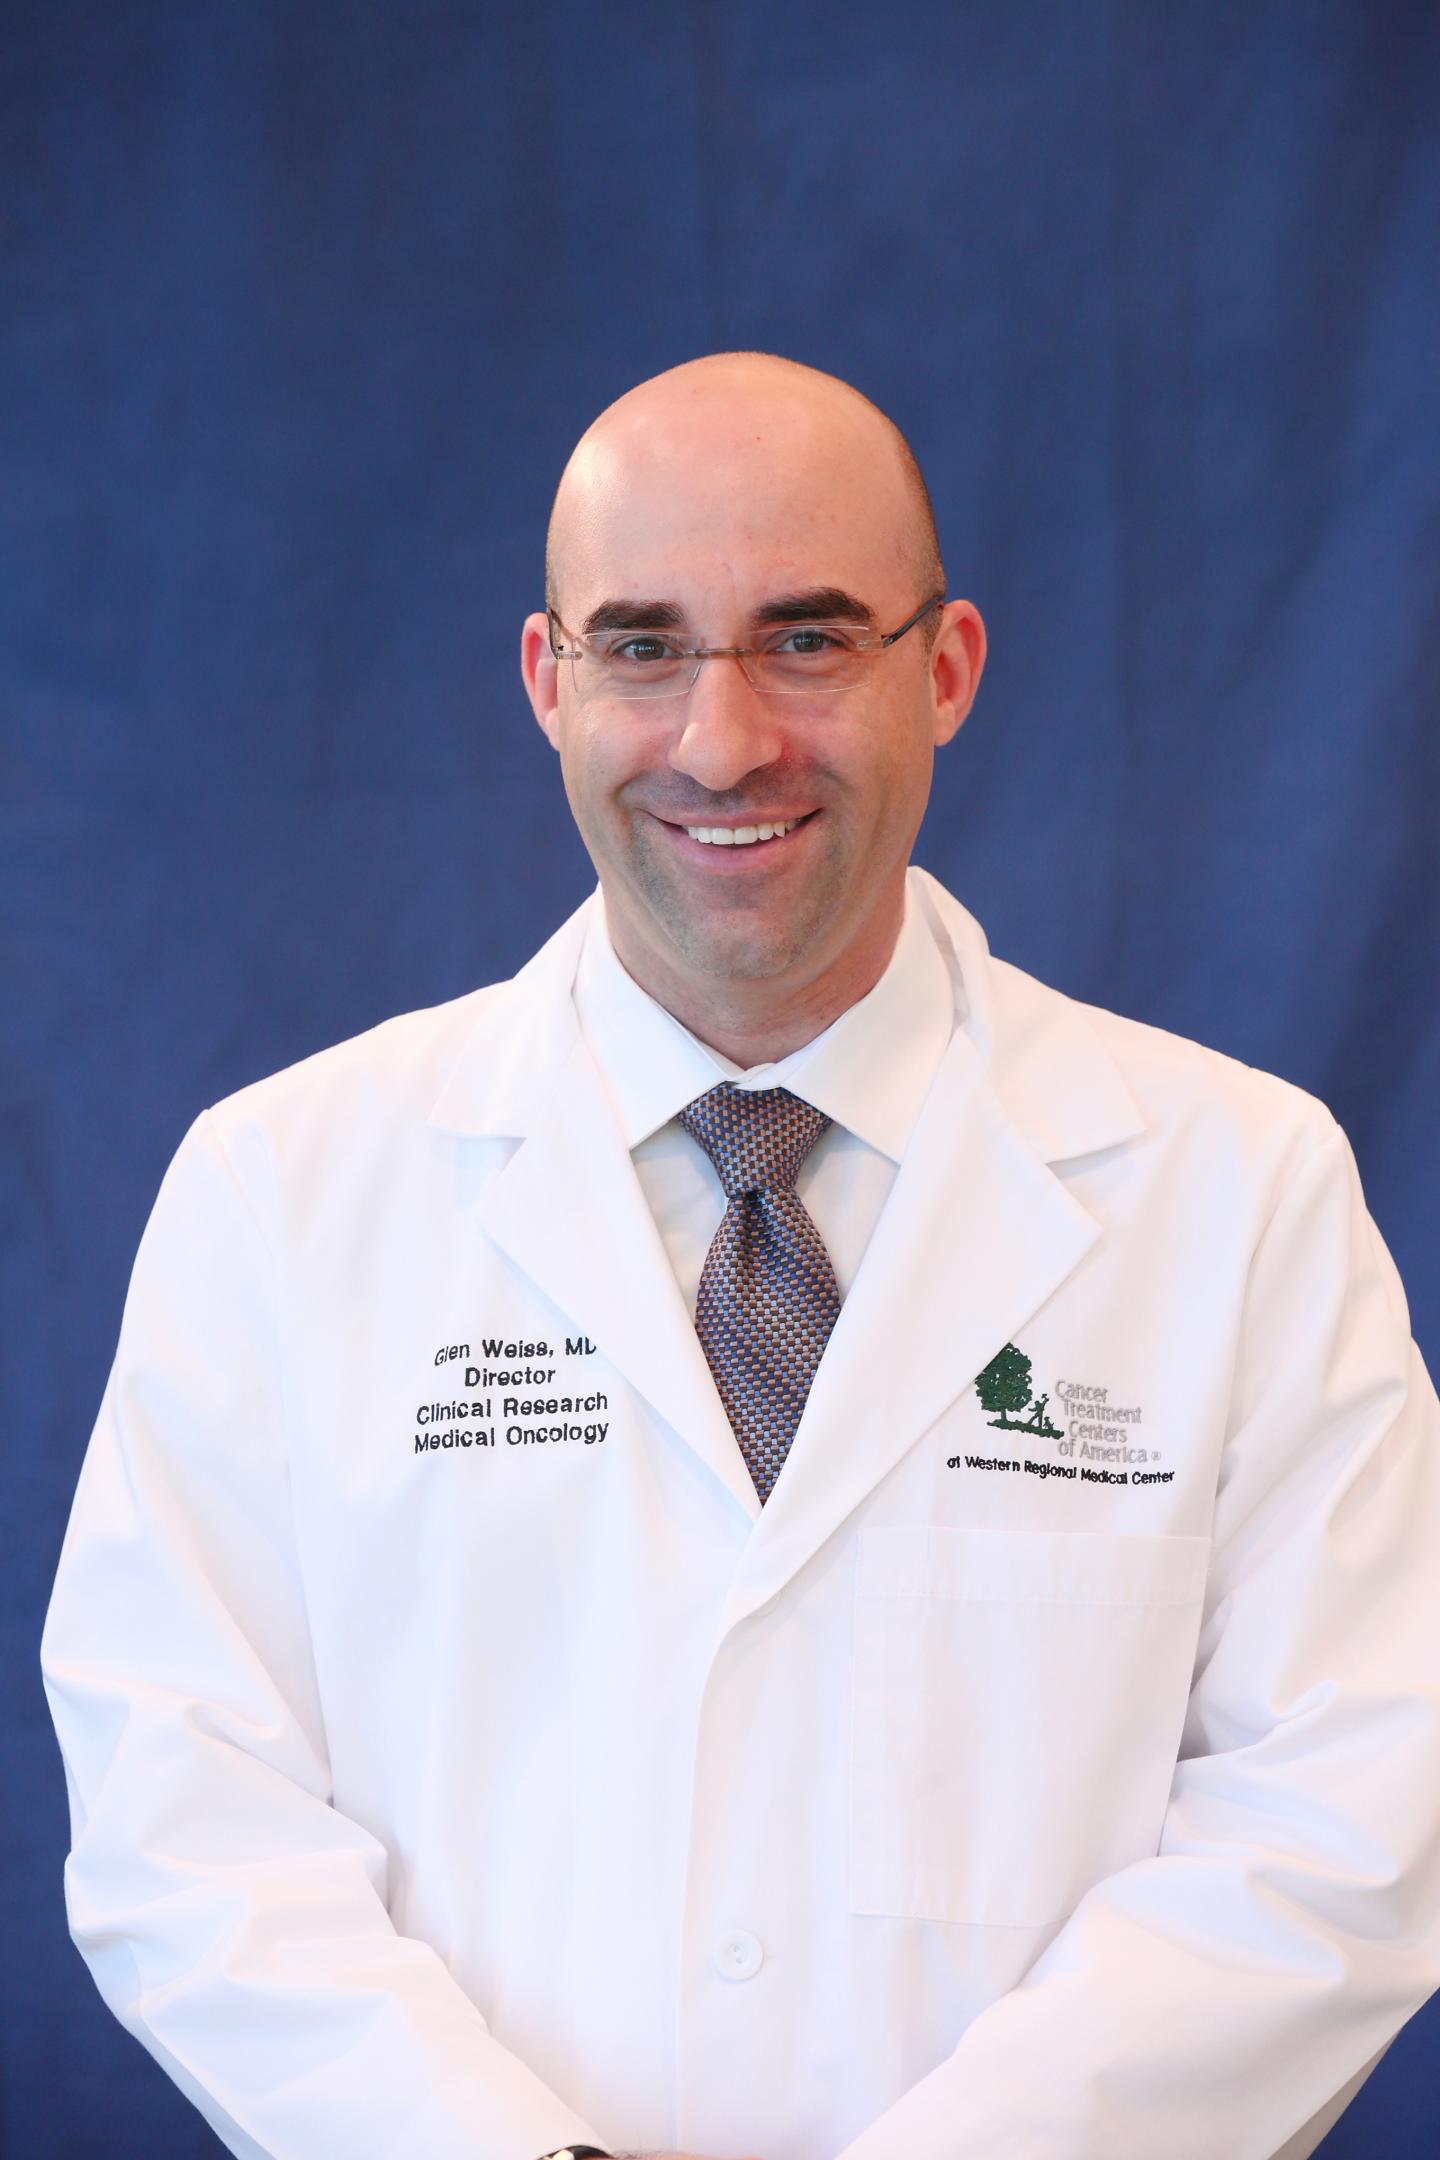 Dr. Glen Weiss, Cancer Treatment Centers of America